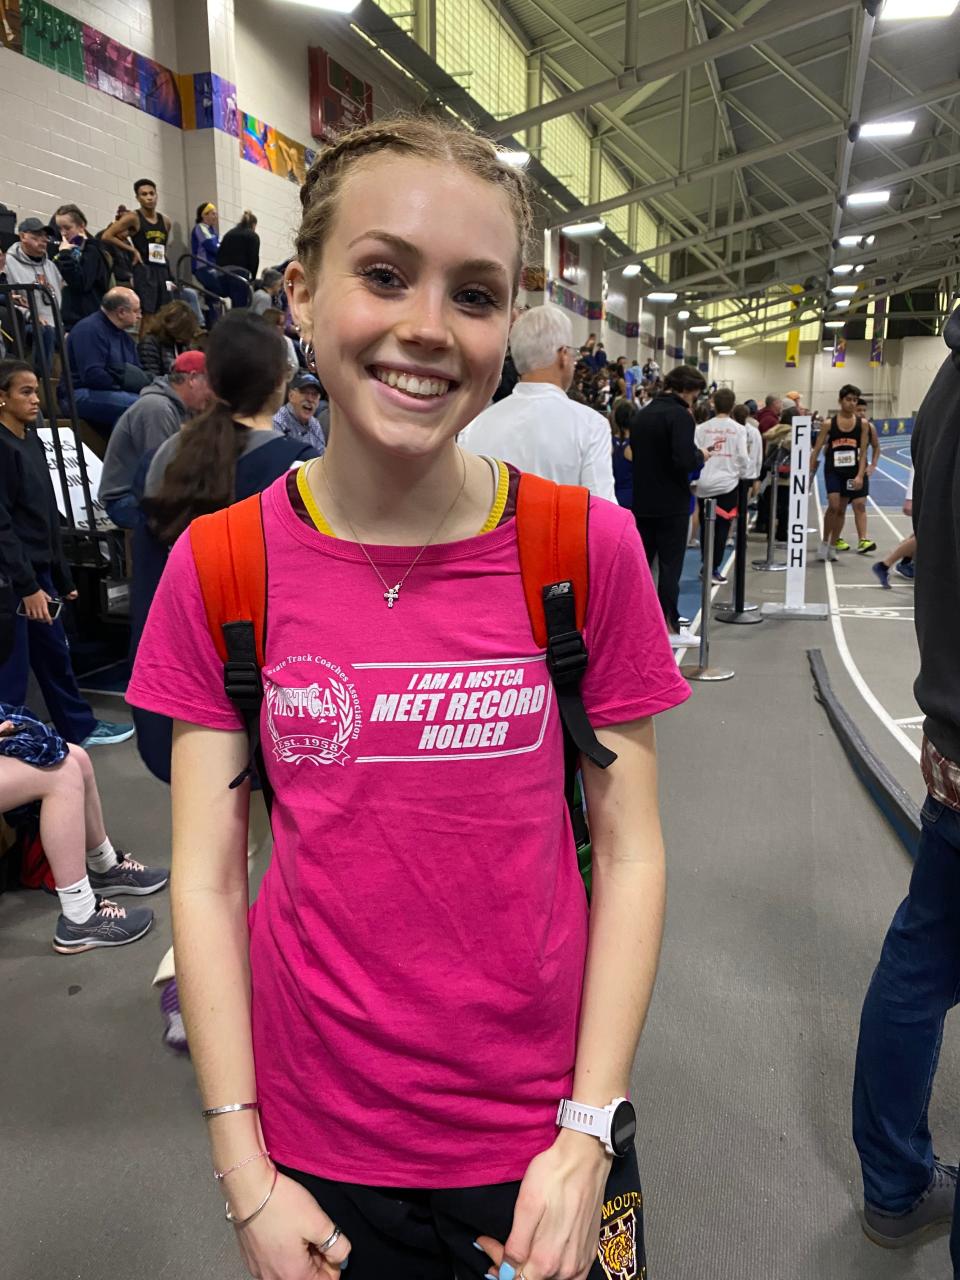 Gracie Richard of Weymouth High has been named to The Patriot Ledger/Enterprise All-Scholastic Girls Cross Country Team.